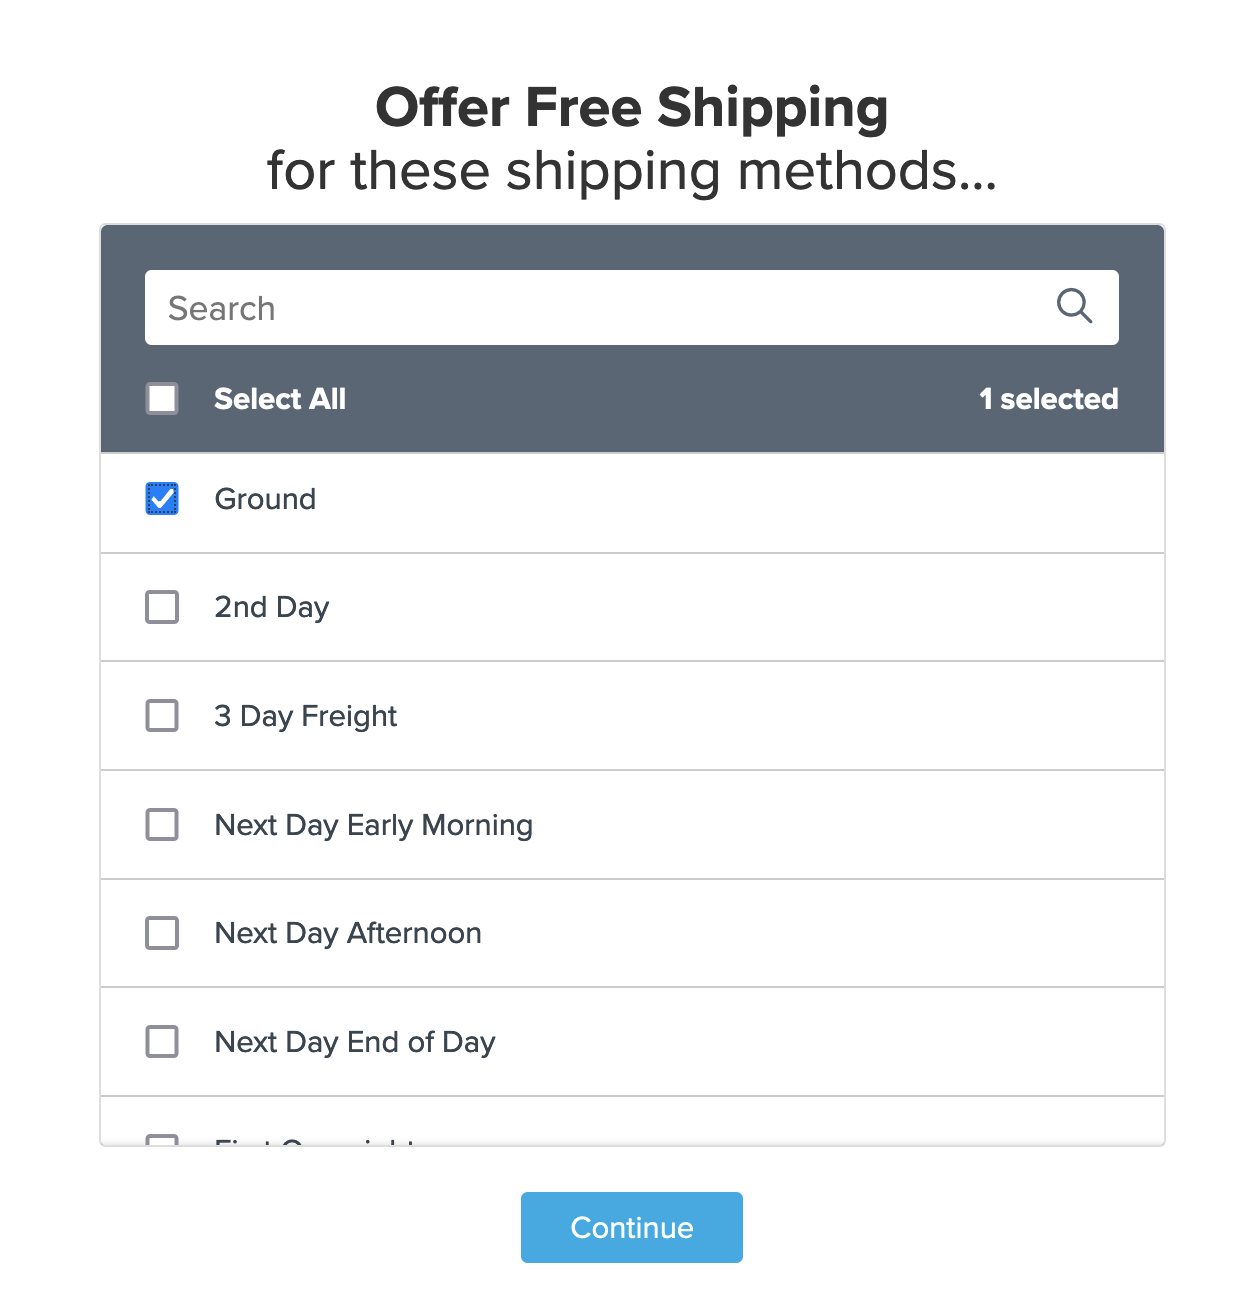 How to Offer Free Shipping on Certain Items Only - ShipperHQ Docs